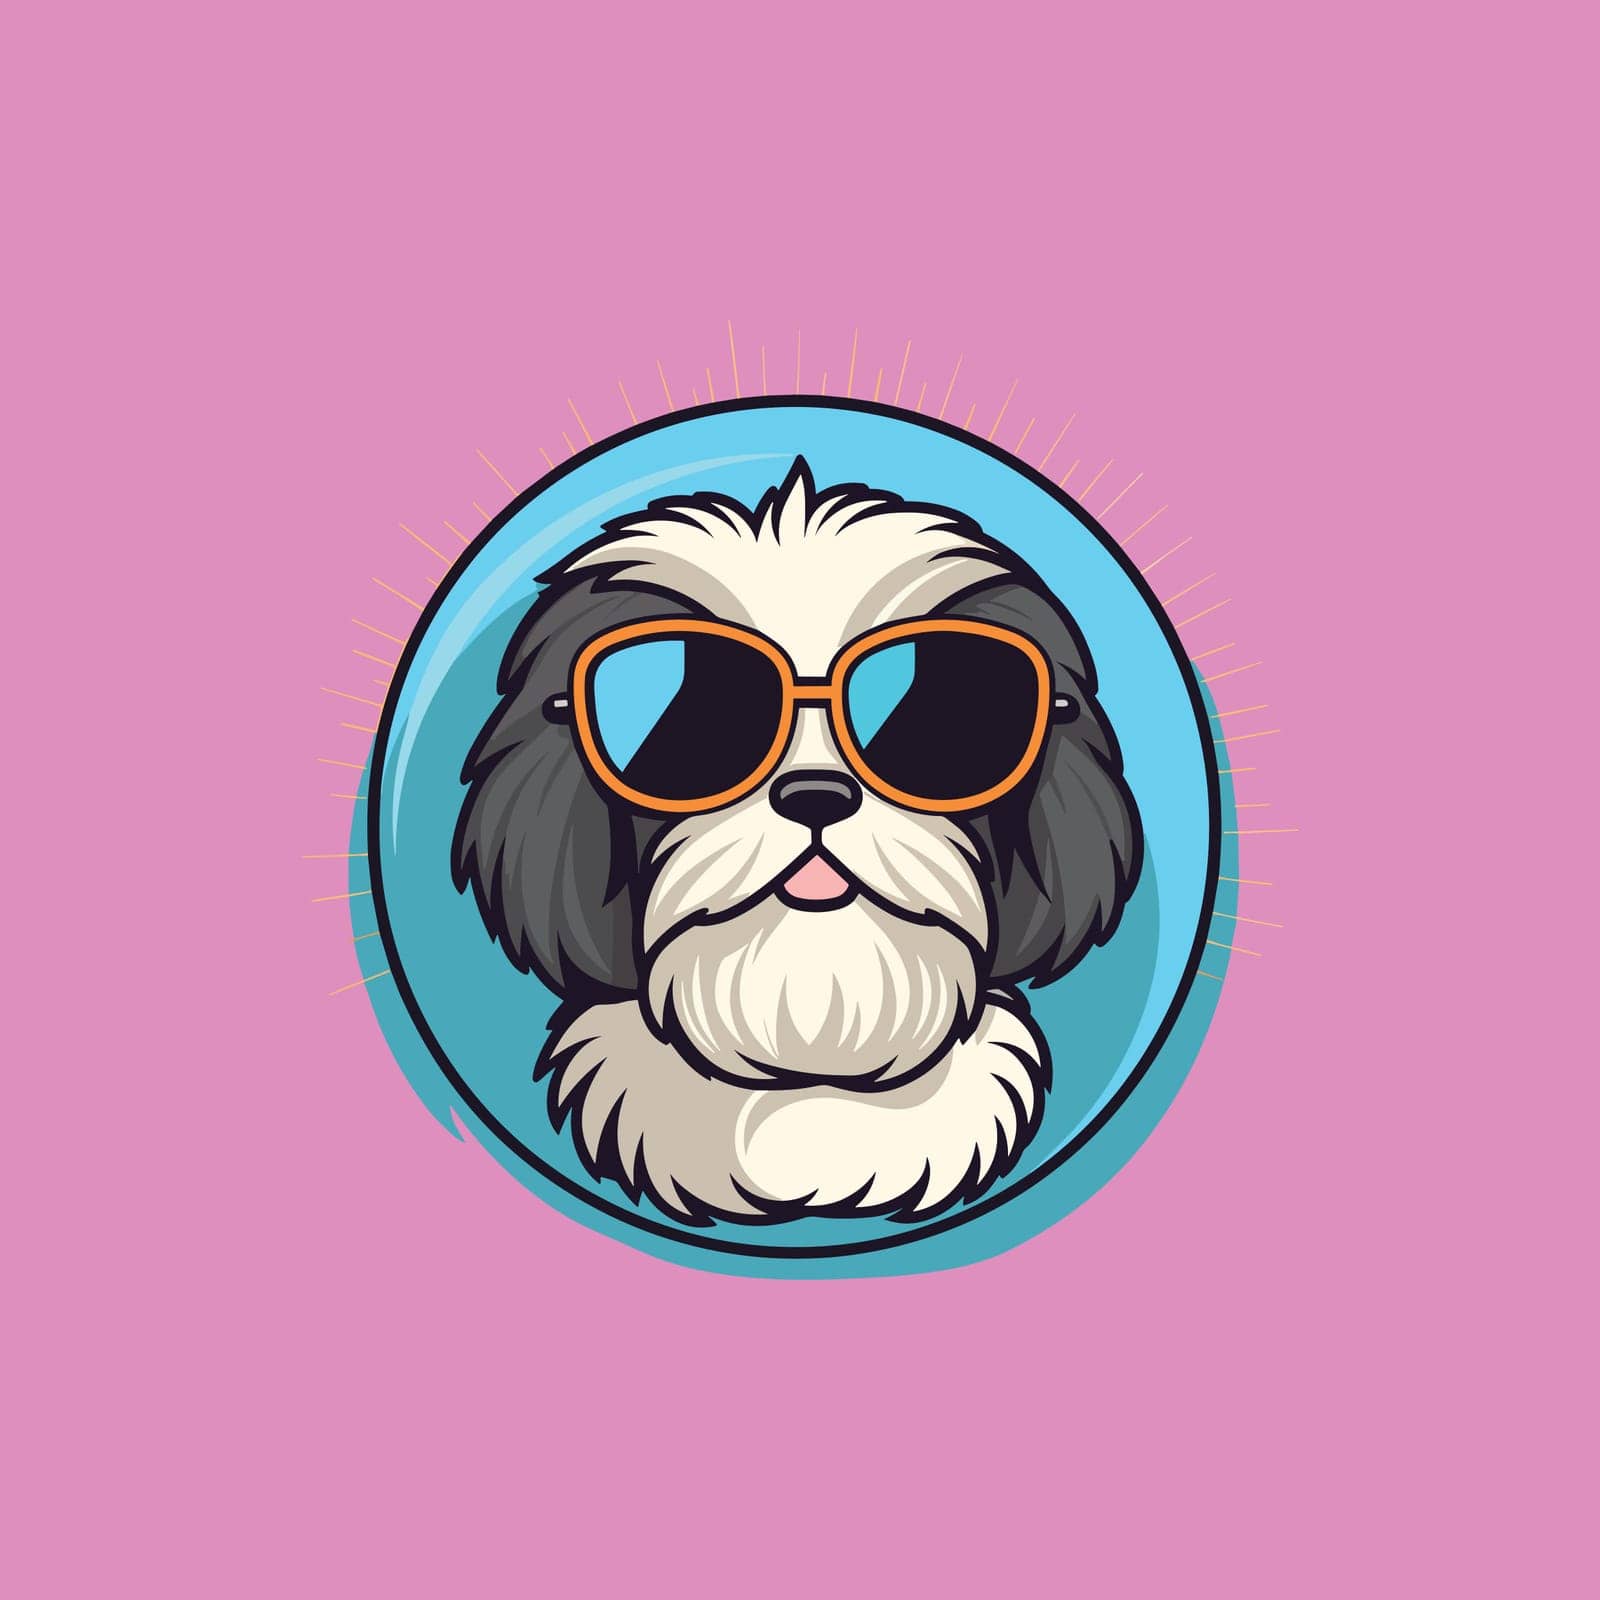 Funky dog wearing sunglasses on pink